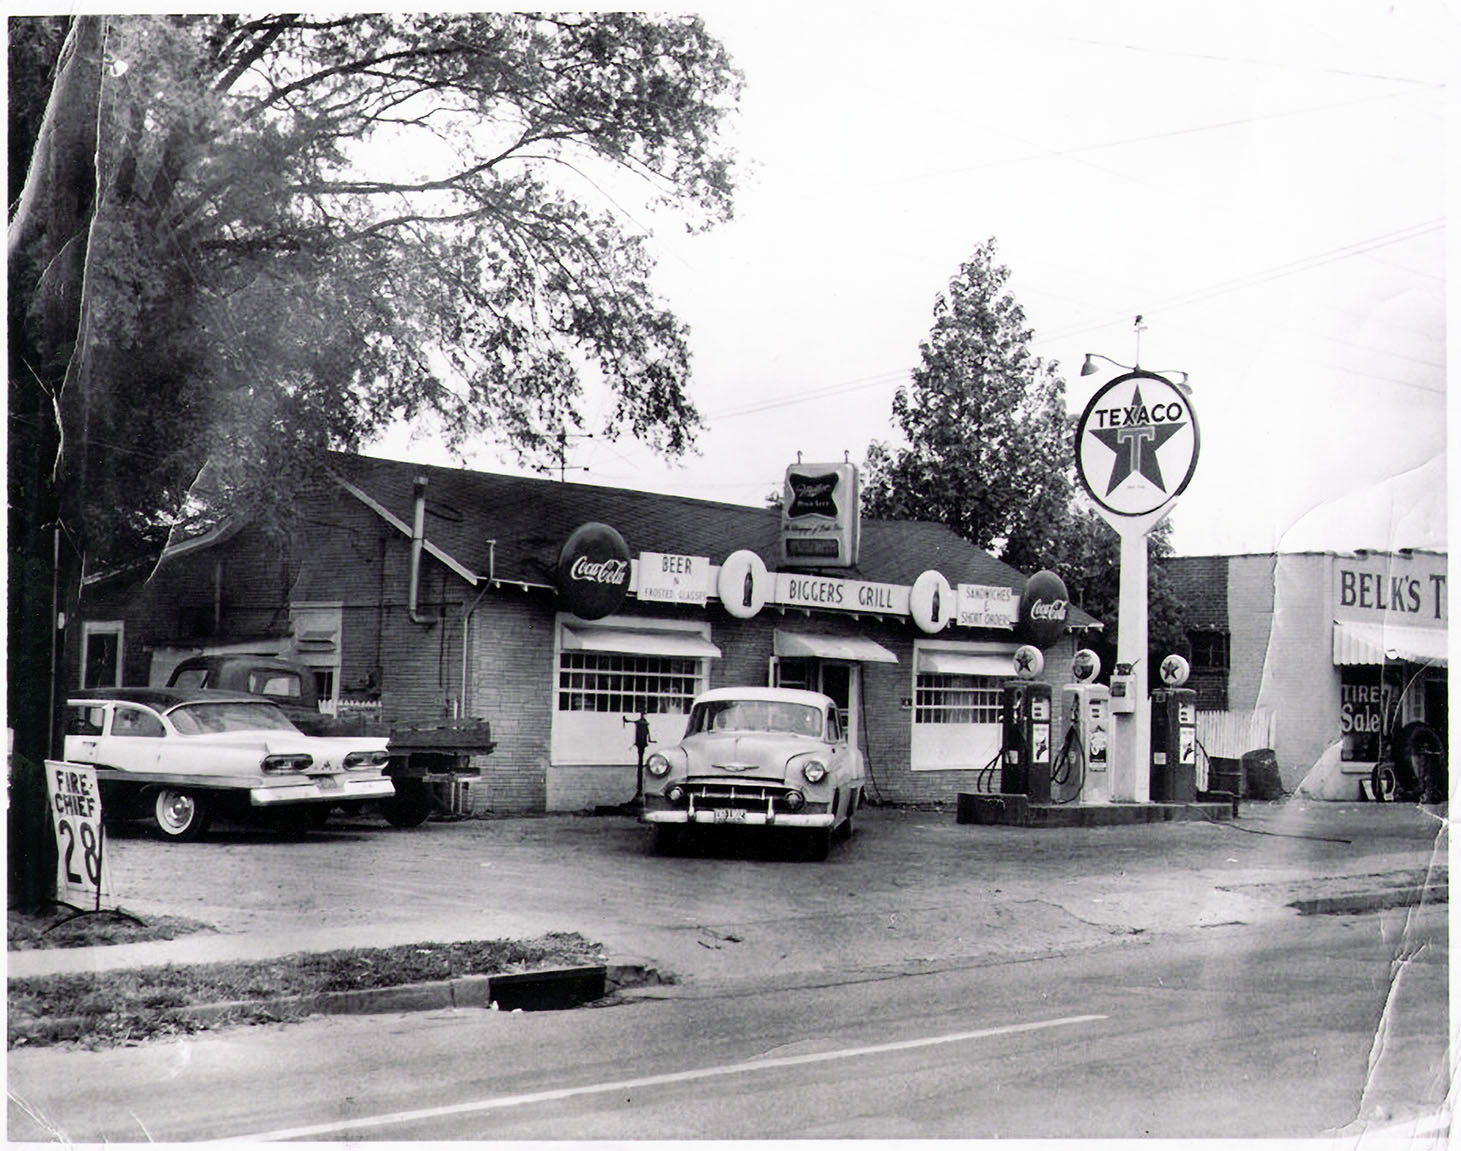 BIGGER'S GRILL ON WEST MAIN ST - WU PETTUS ARCHIVES CA. 1960'S